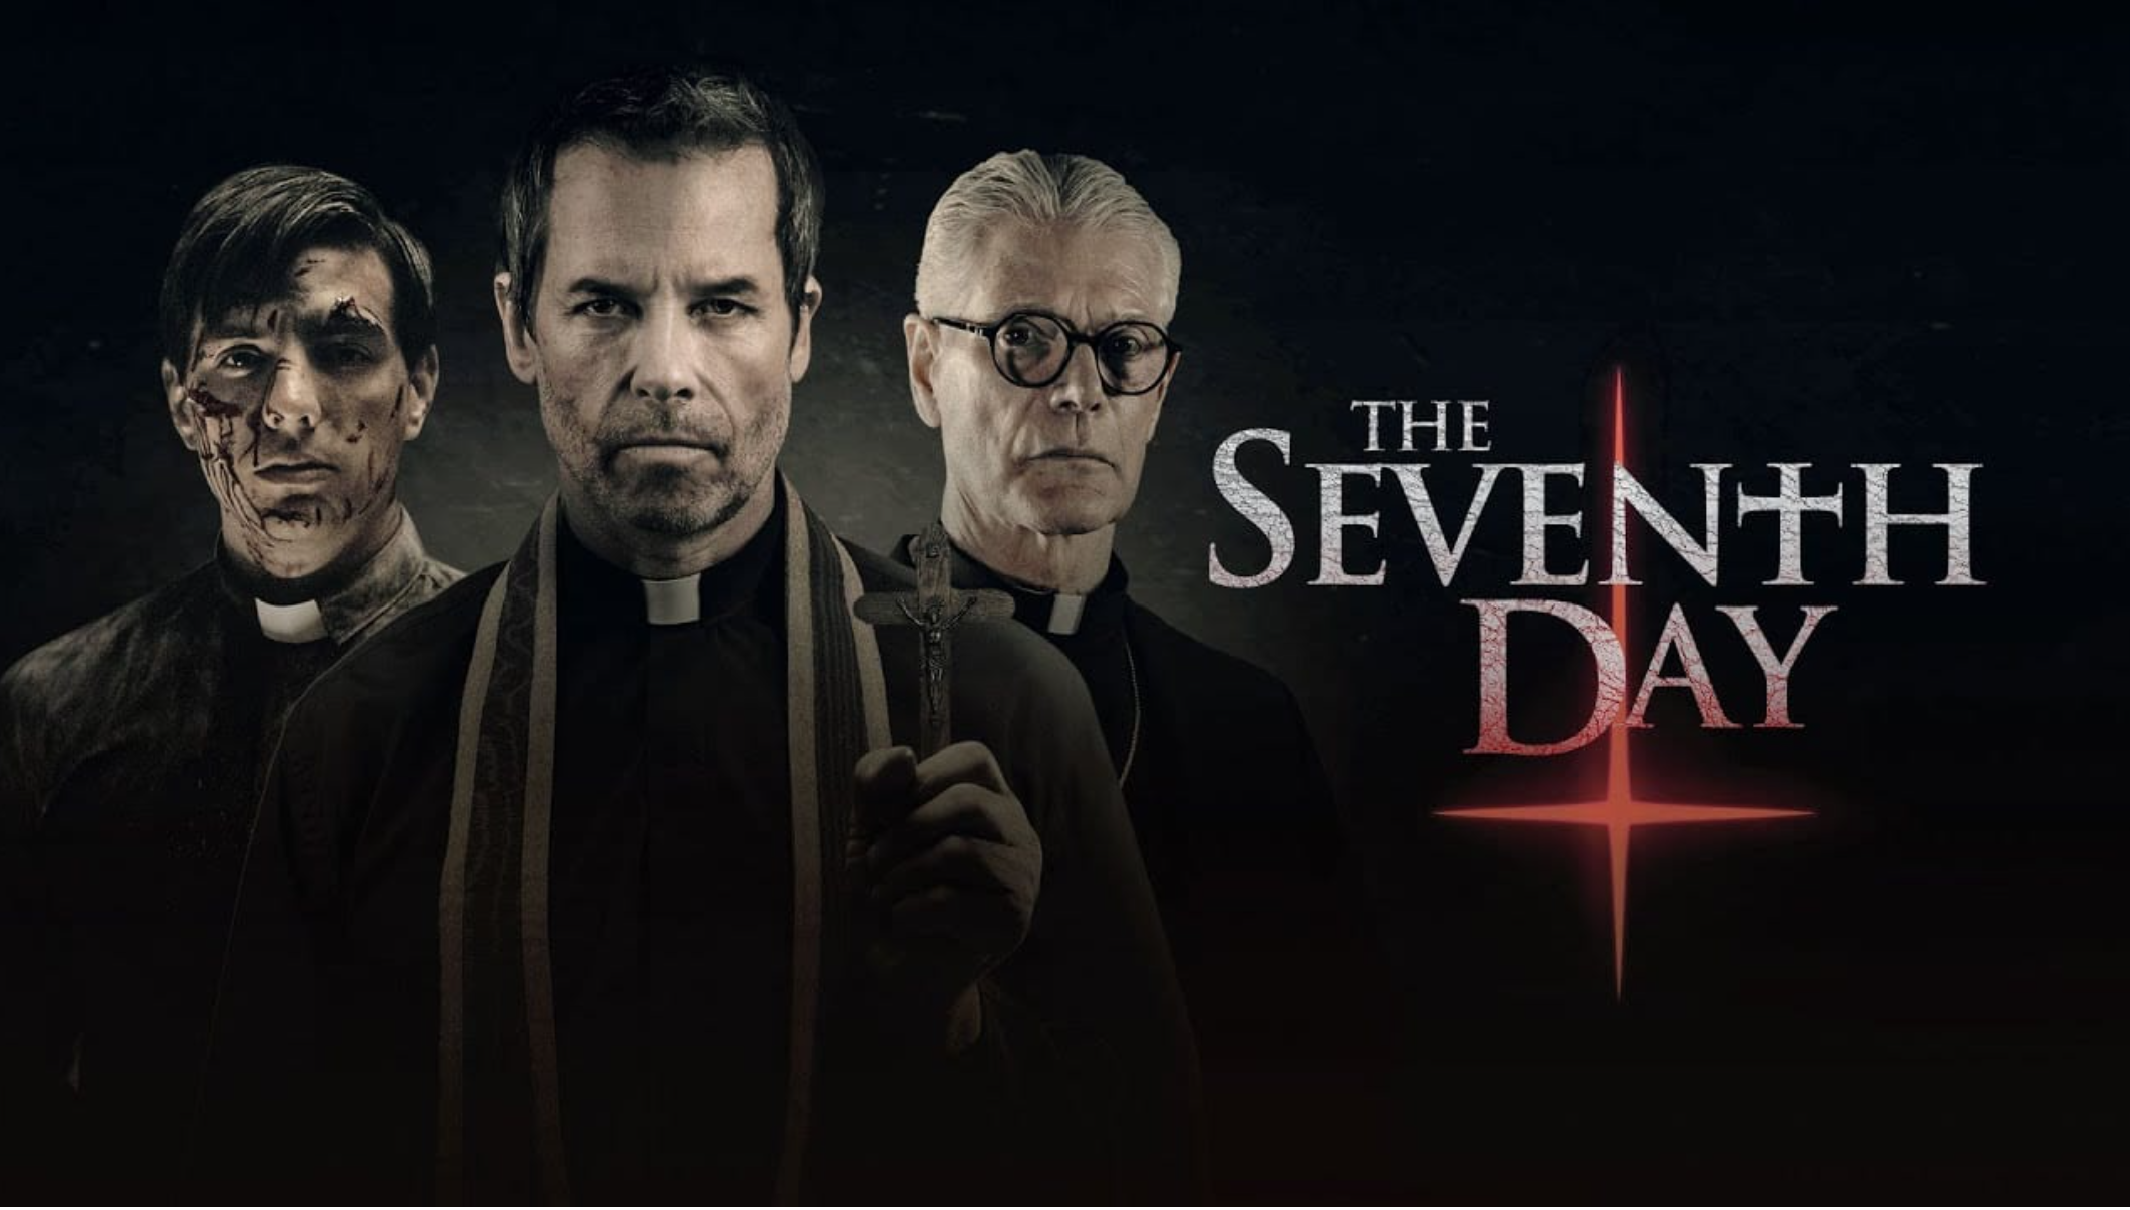 Poster for Seventh Day movie with a young beat up looking priest standing on one side of a middle age priest with an old priest standing on the other side. There is an upside down cross in red next to the title.